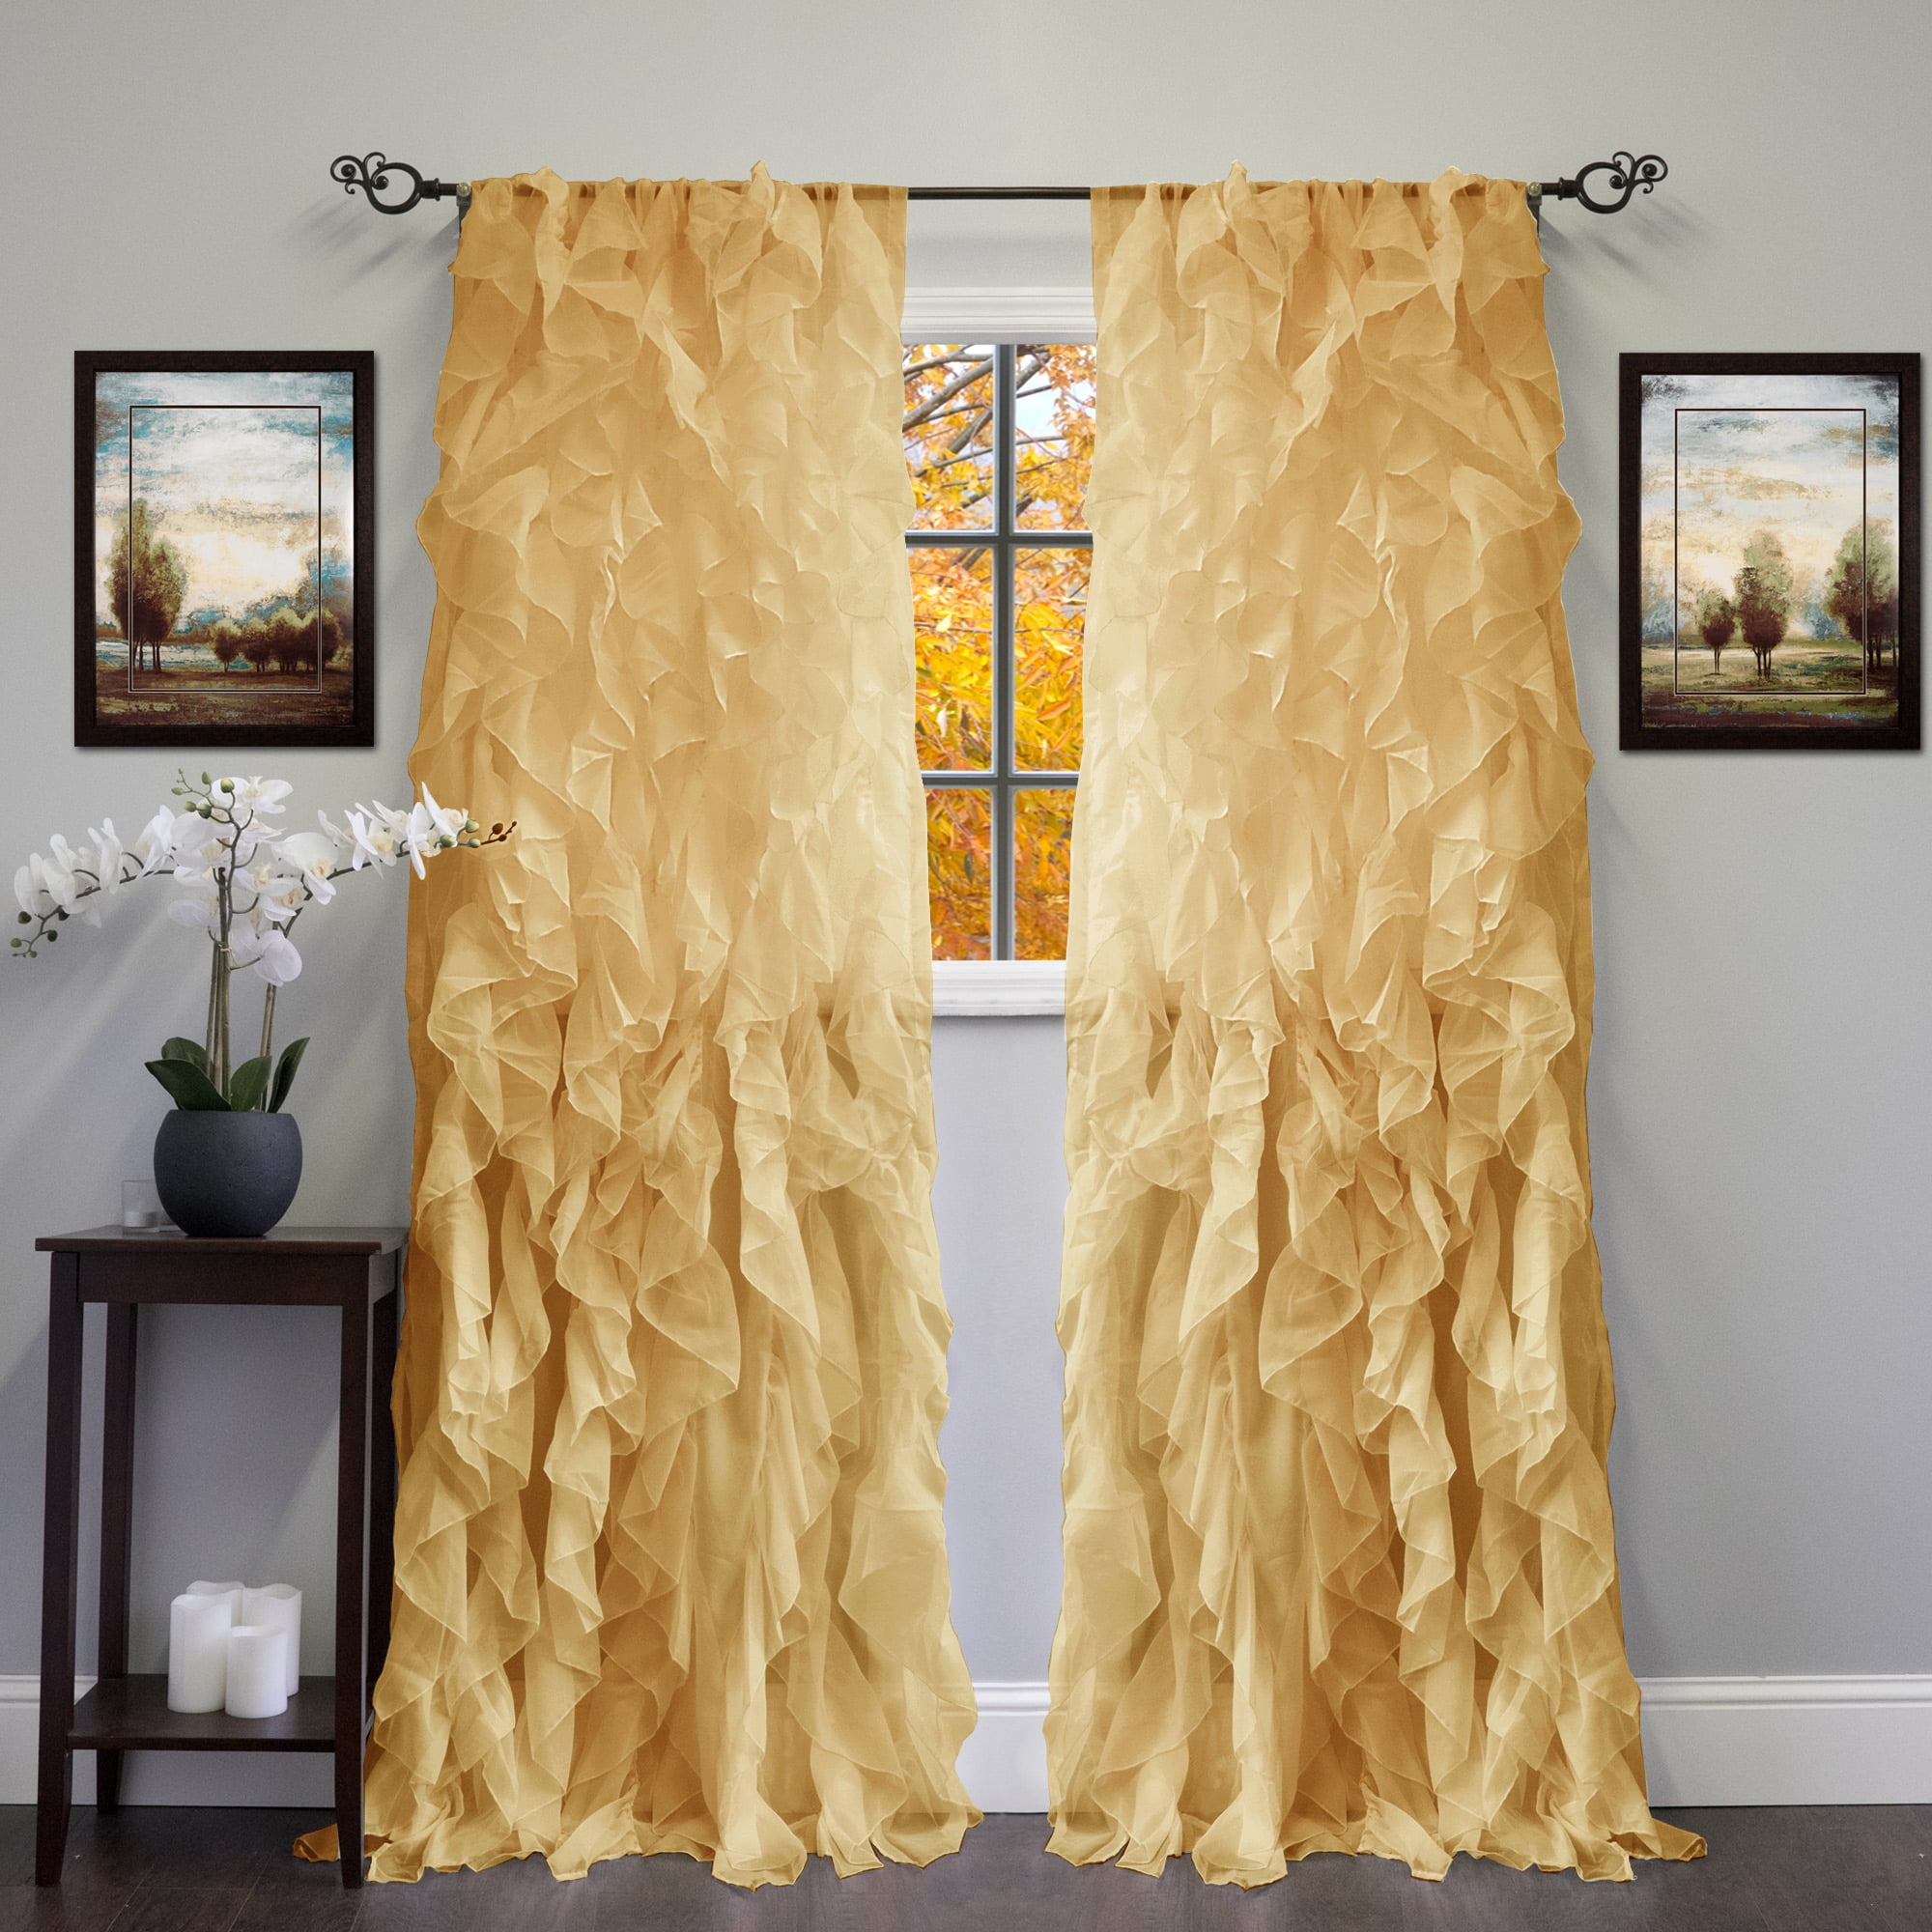 2PC LIVING ROOM VERTICAL RUFFLES PANEL VOILE SHEER FABRIC WINDOW CURTAIN 